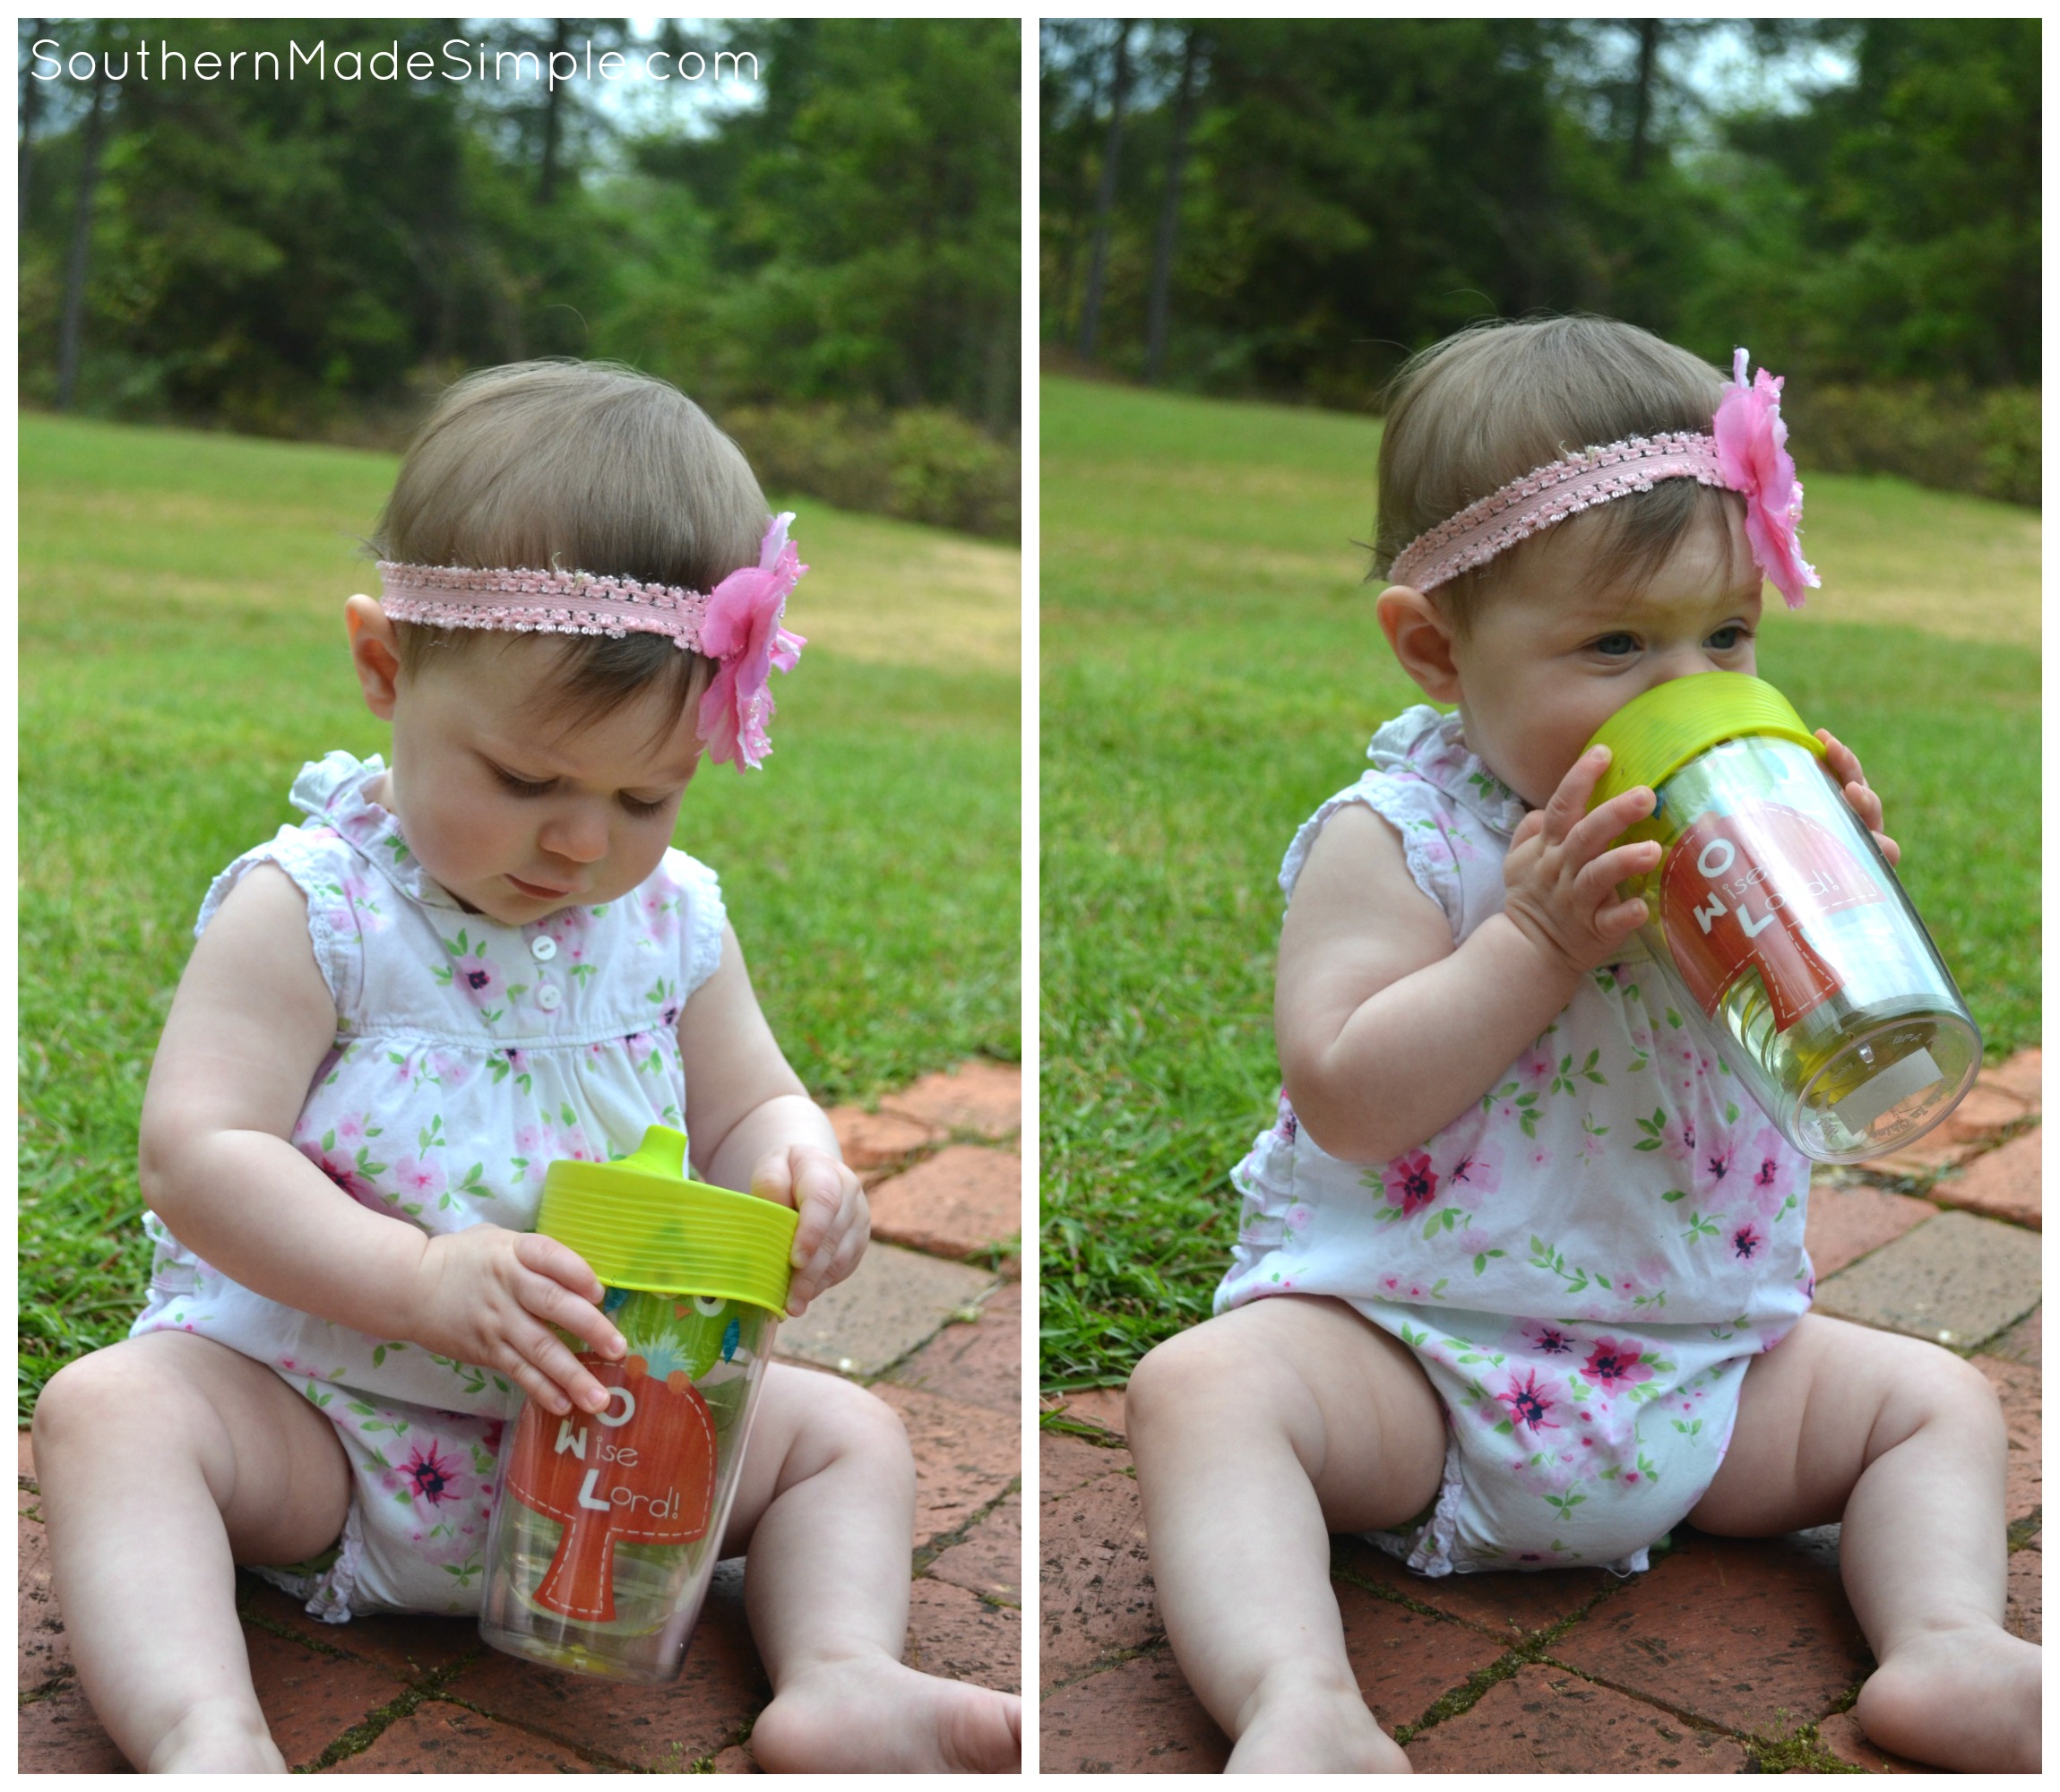 Turn any cup into a sippy cup with this neat product!